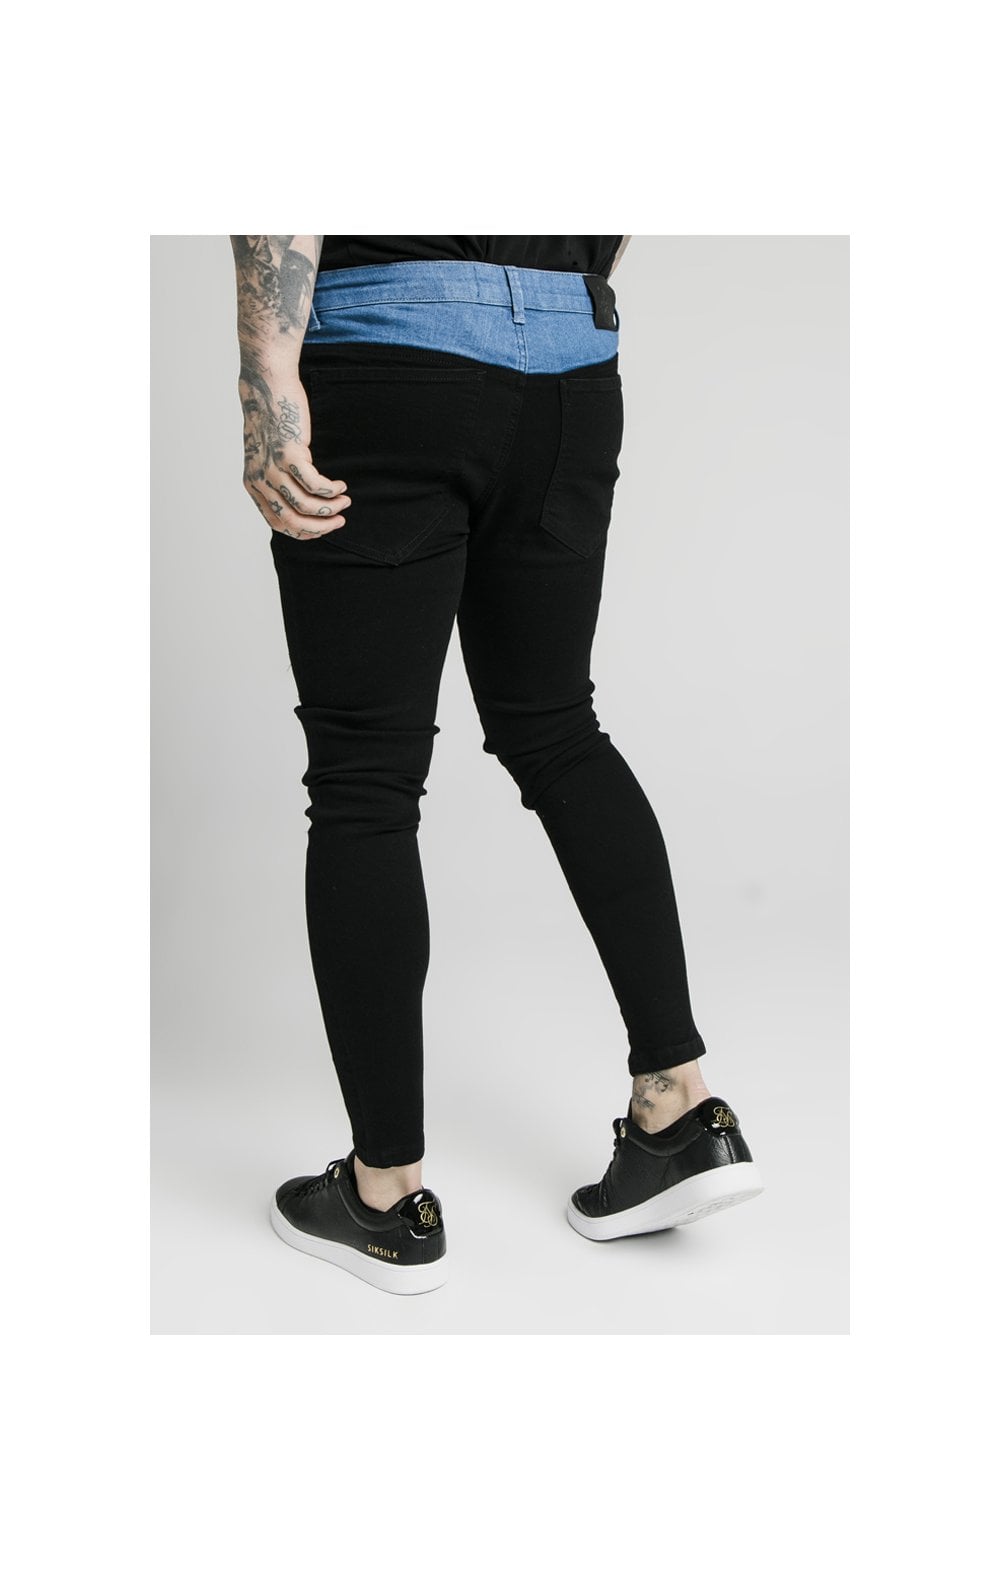 SikSilk Contrast Distressed Skinny Jeans - Washed Black & Midstone (1)